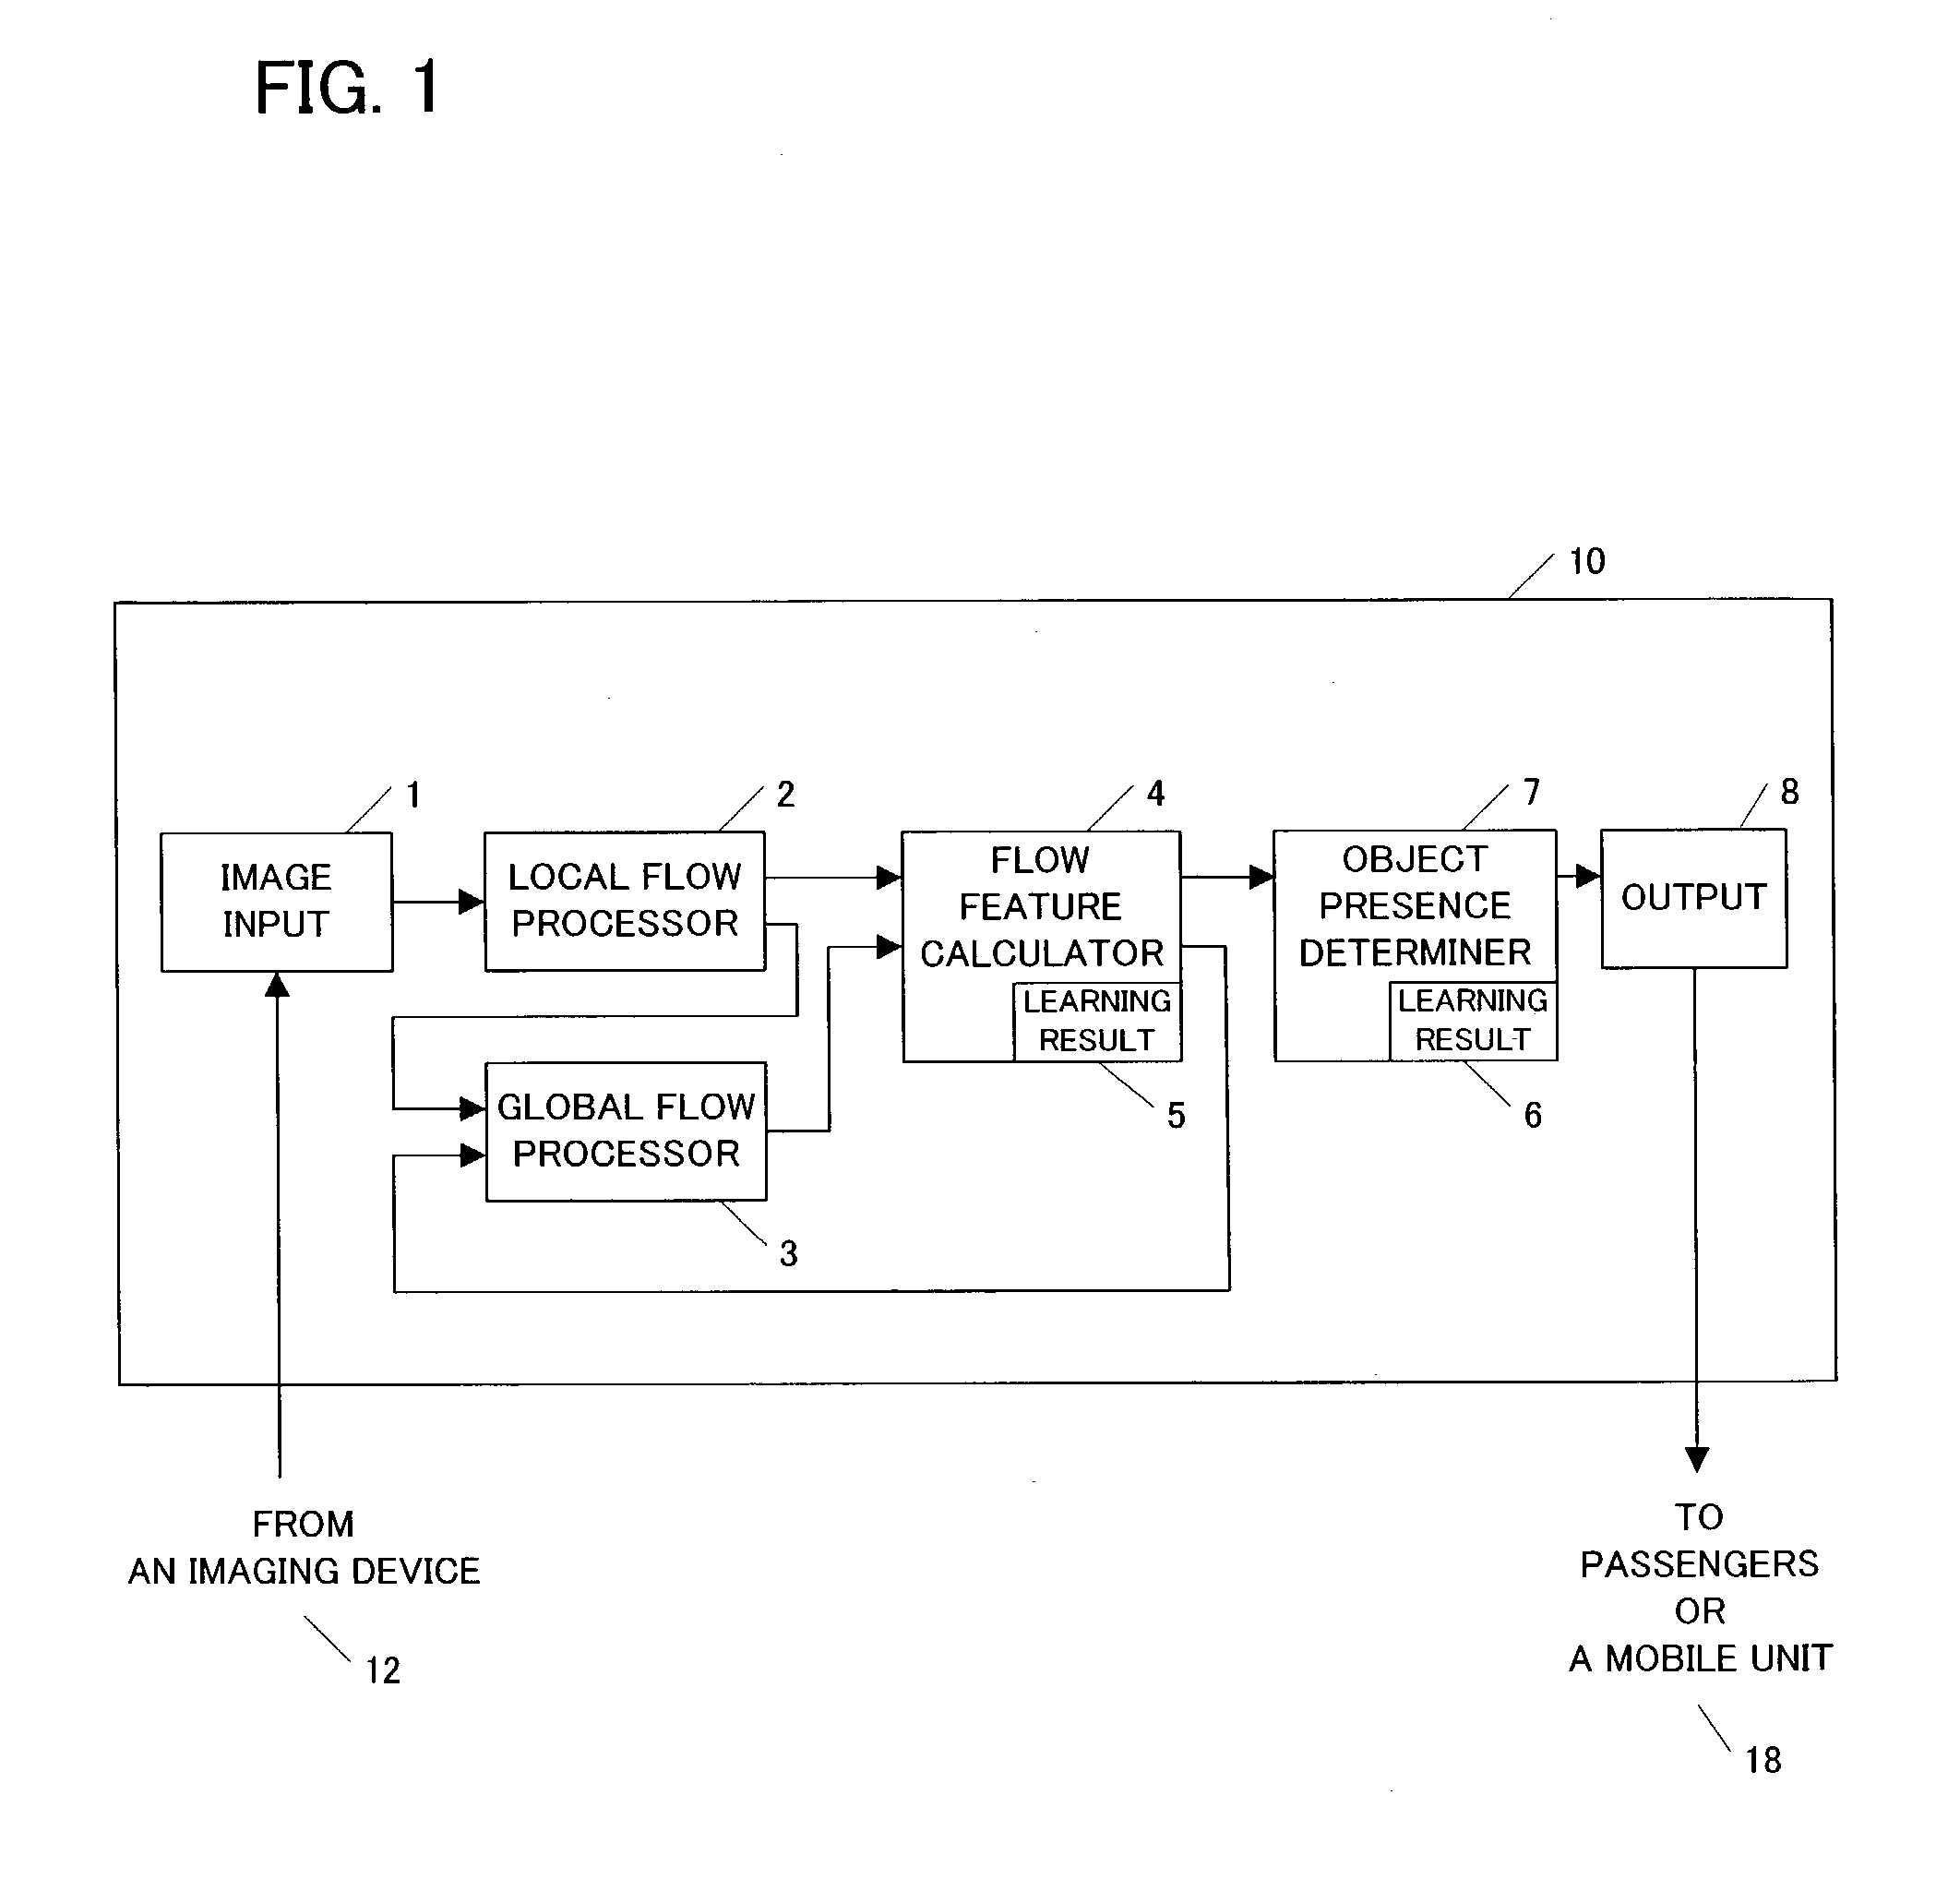 Apparatus, program and method for detecting both stationary objects and moving objects in an image using optical flow